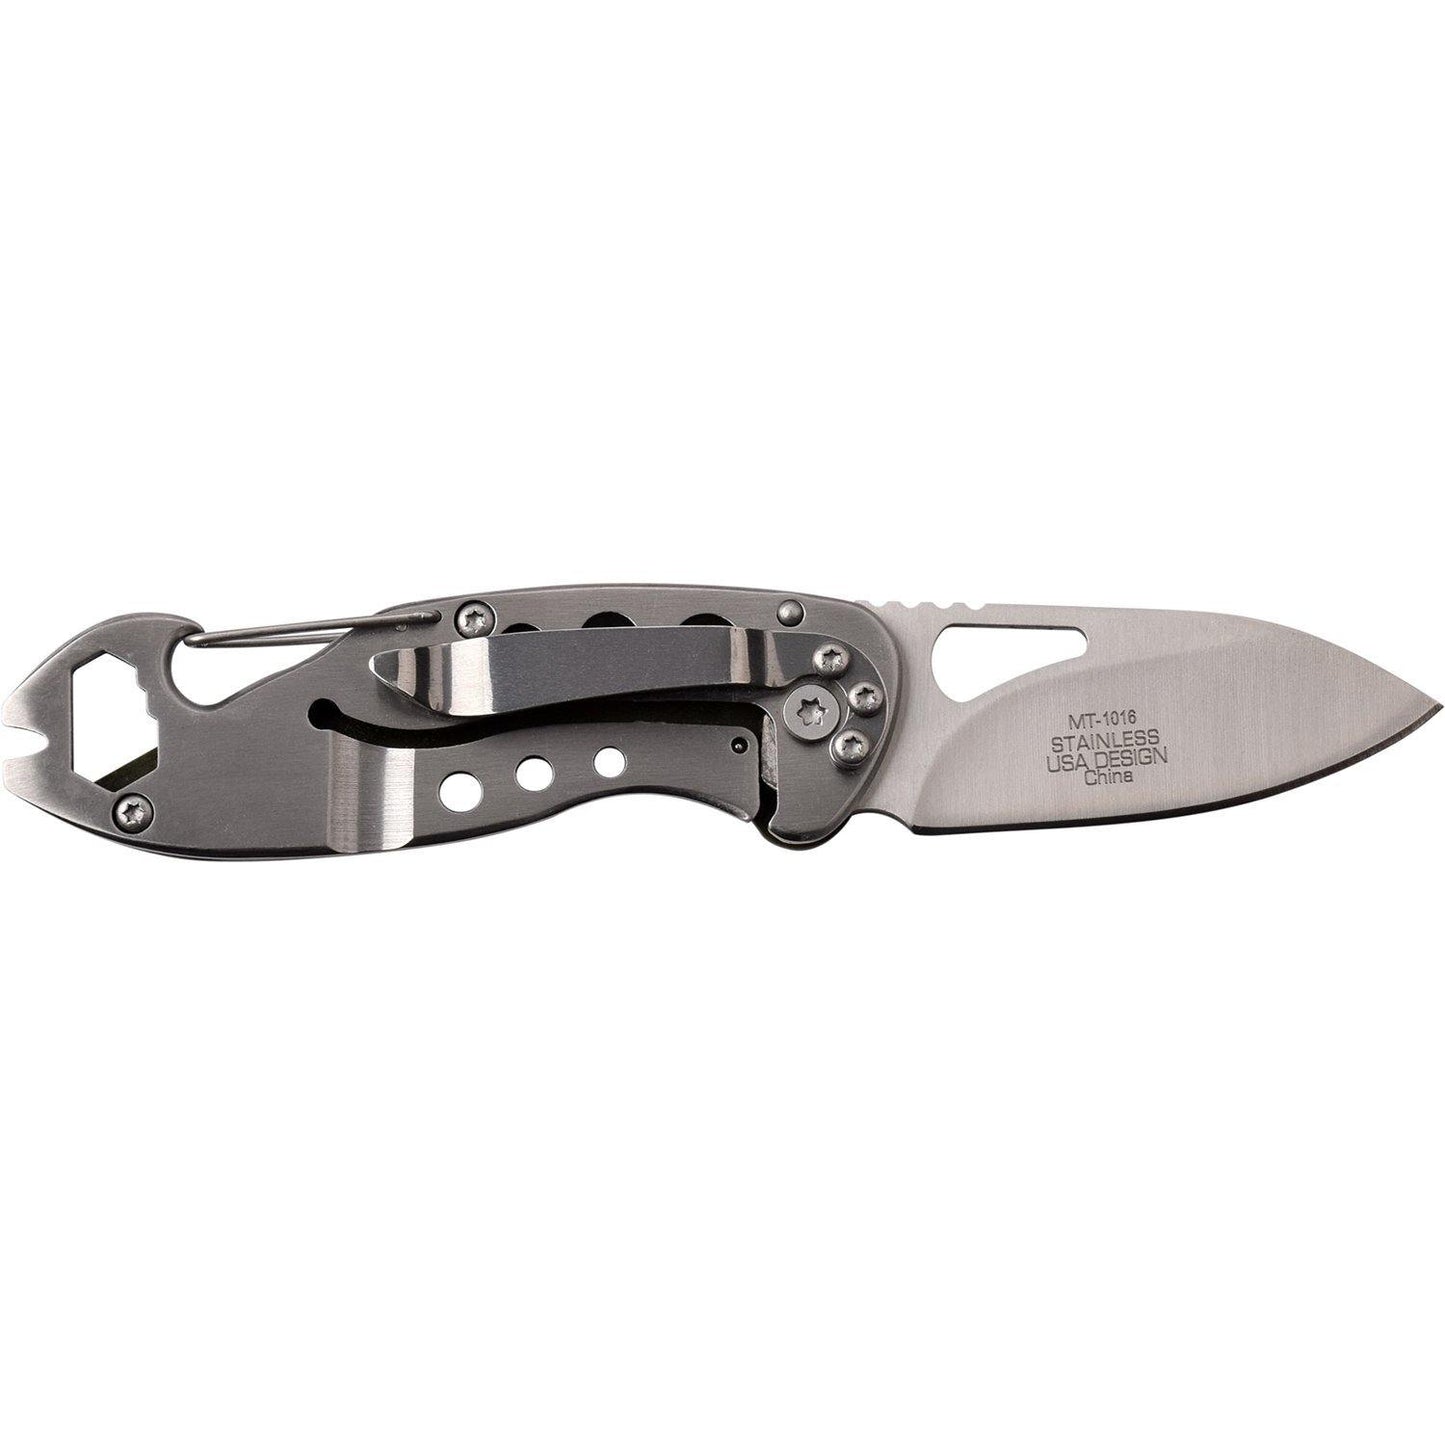 Mtech Drop Point Fine Edge Blade Multifunction Folding Knife - 5.6 Inches G10 Handle #mt-1016Gn - Xhunter New Zealand